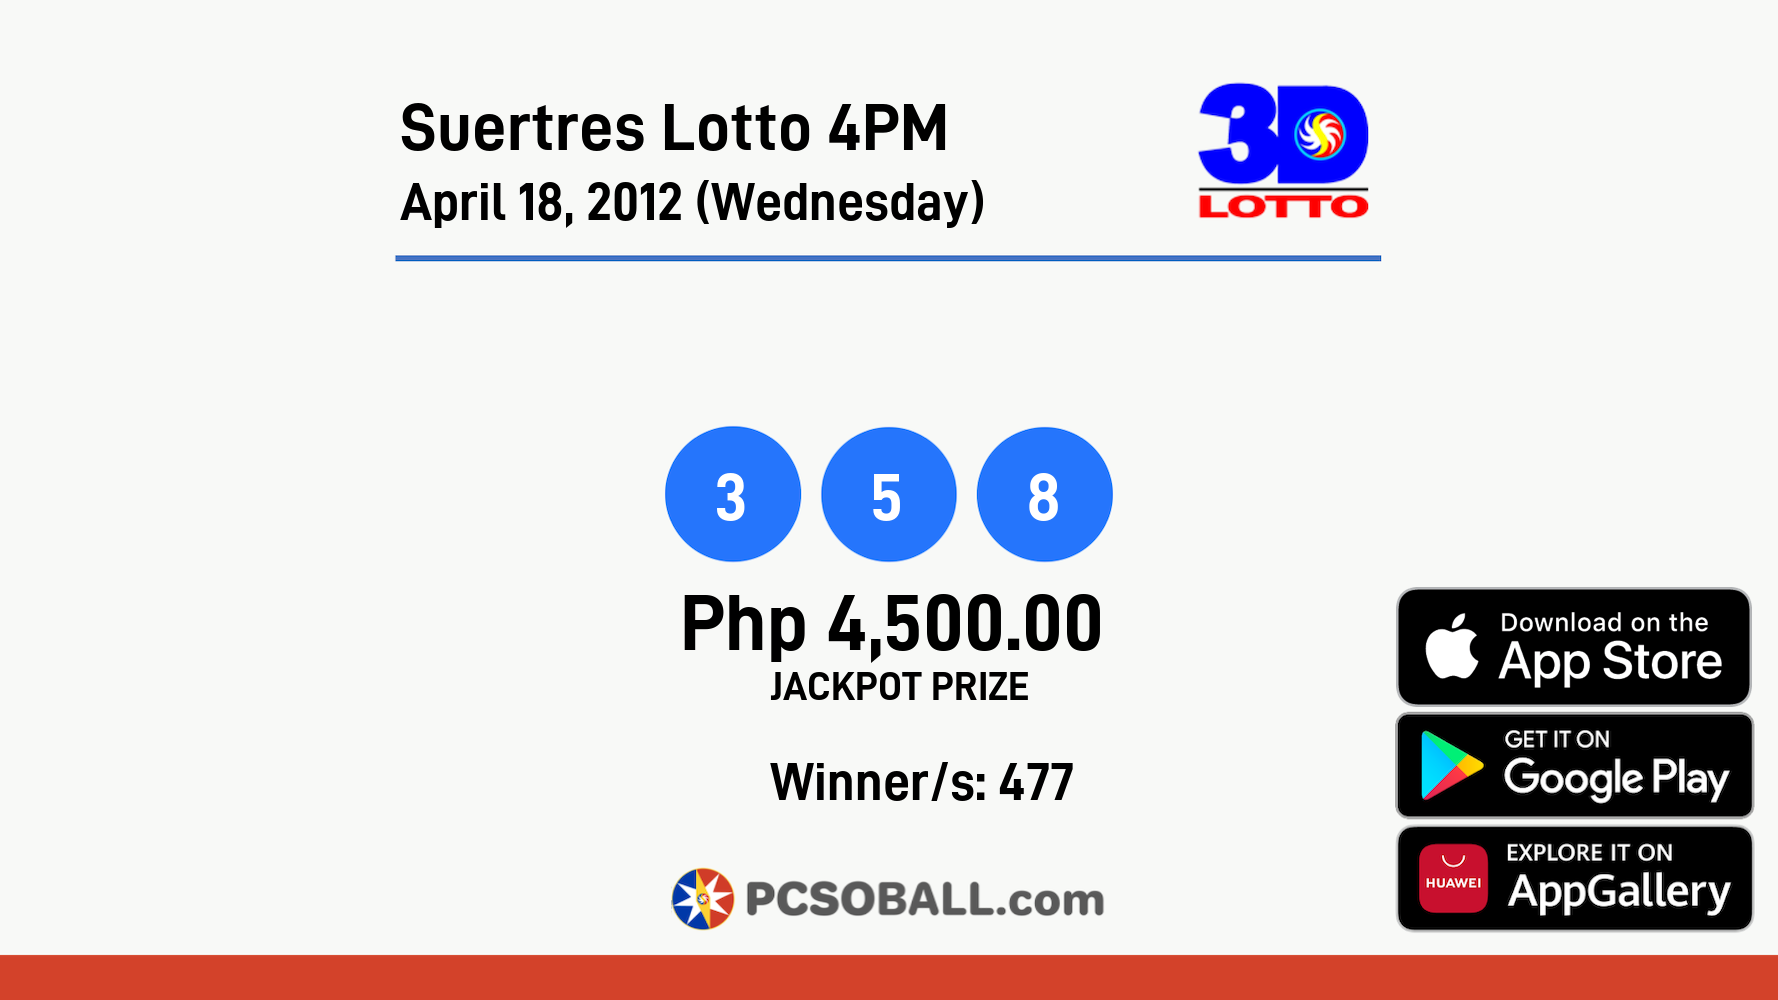 Suertres Lotto 4PM April 18, 2012 (Wednesday) Result